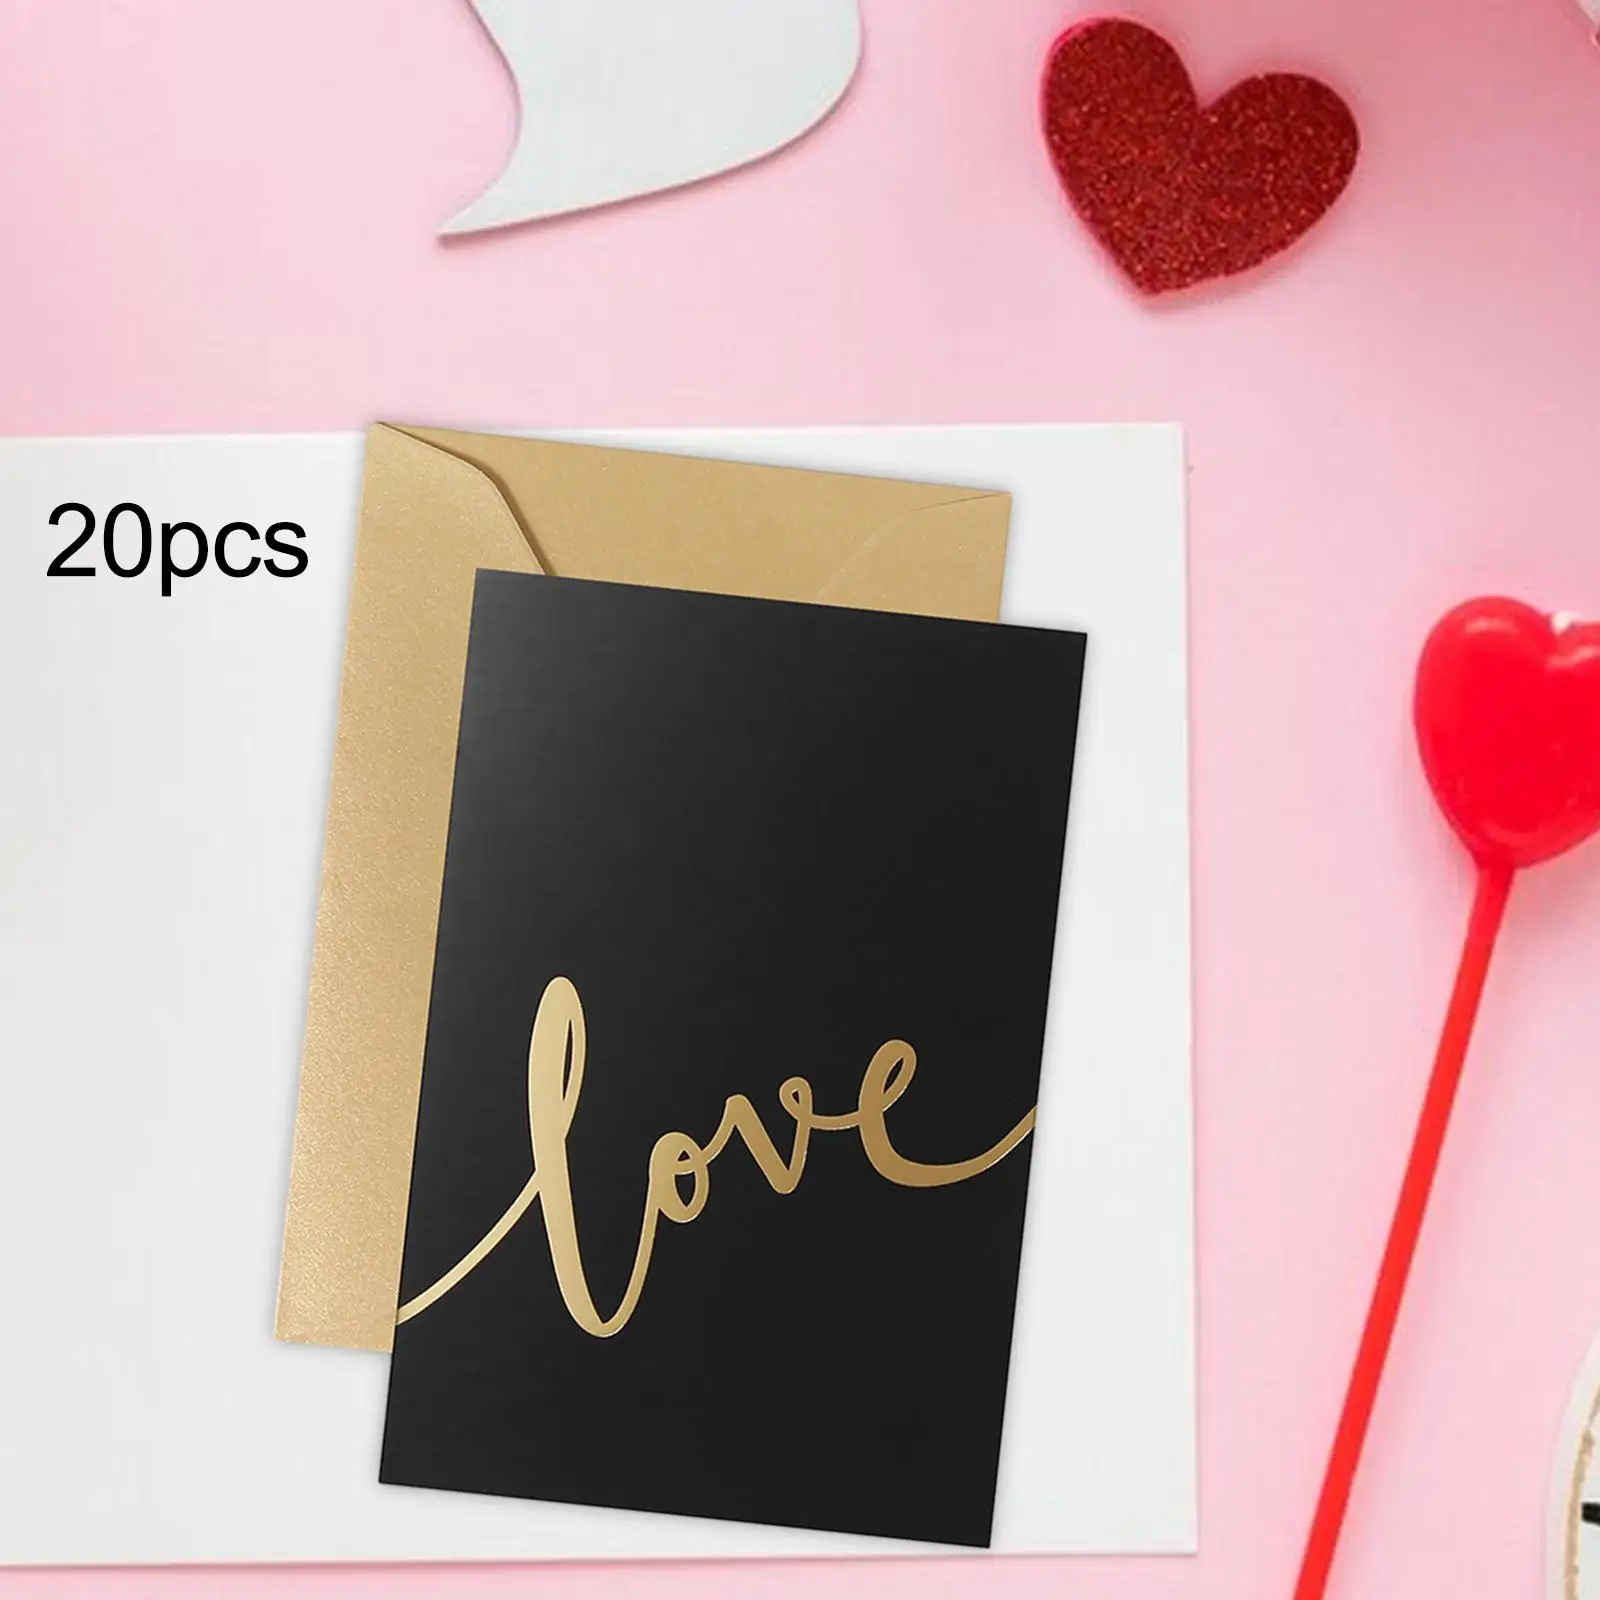 20Pcs Valentines Day Cards Retirement Card Birthday Card Holiday Card for Anniversary Party Fathers Day Festival Girlfriend